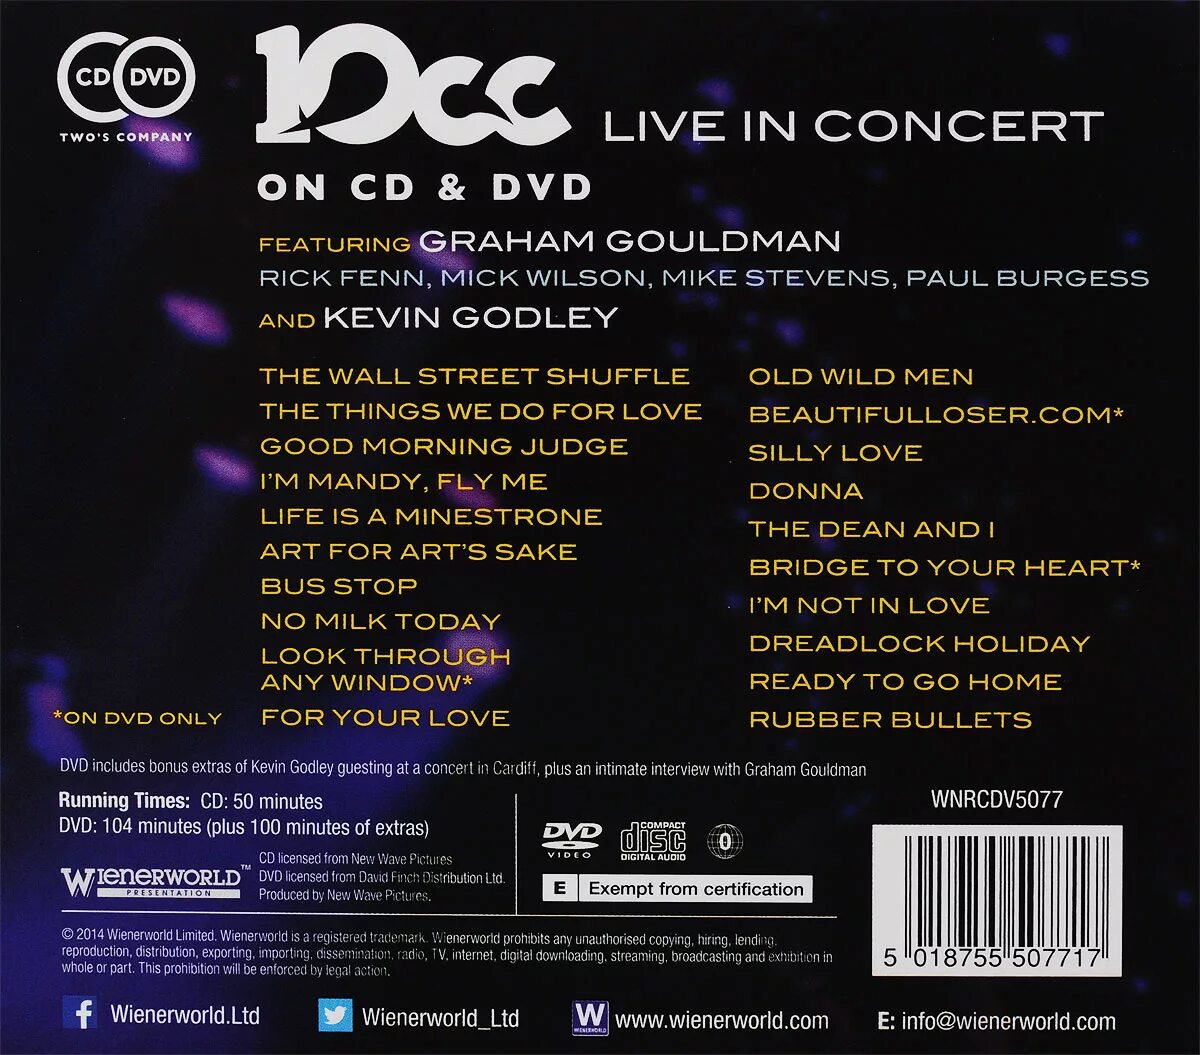 Концерт (DVD). Clever Clogs. Live in Concert. 10cc - Clever Clogs - Live in Concert 2007.фото.